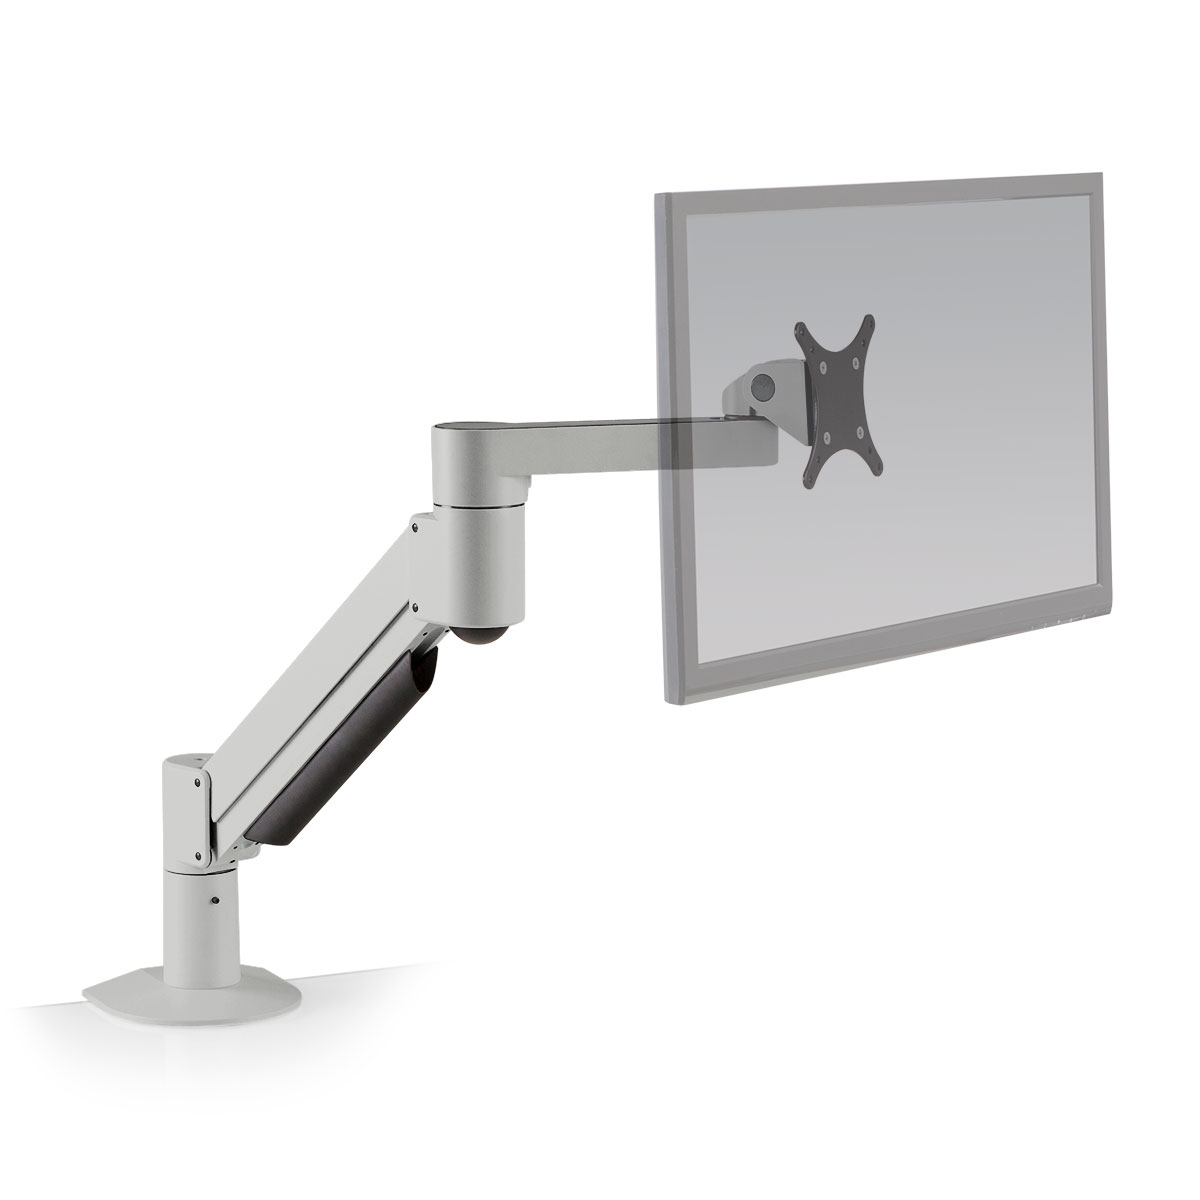 7500 - Deluxe Monitor Arm | Innovative Design Works